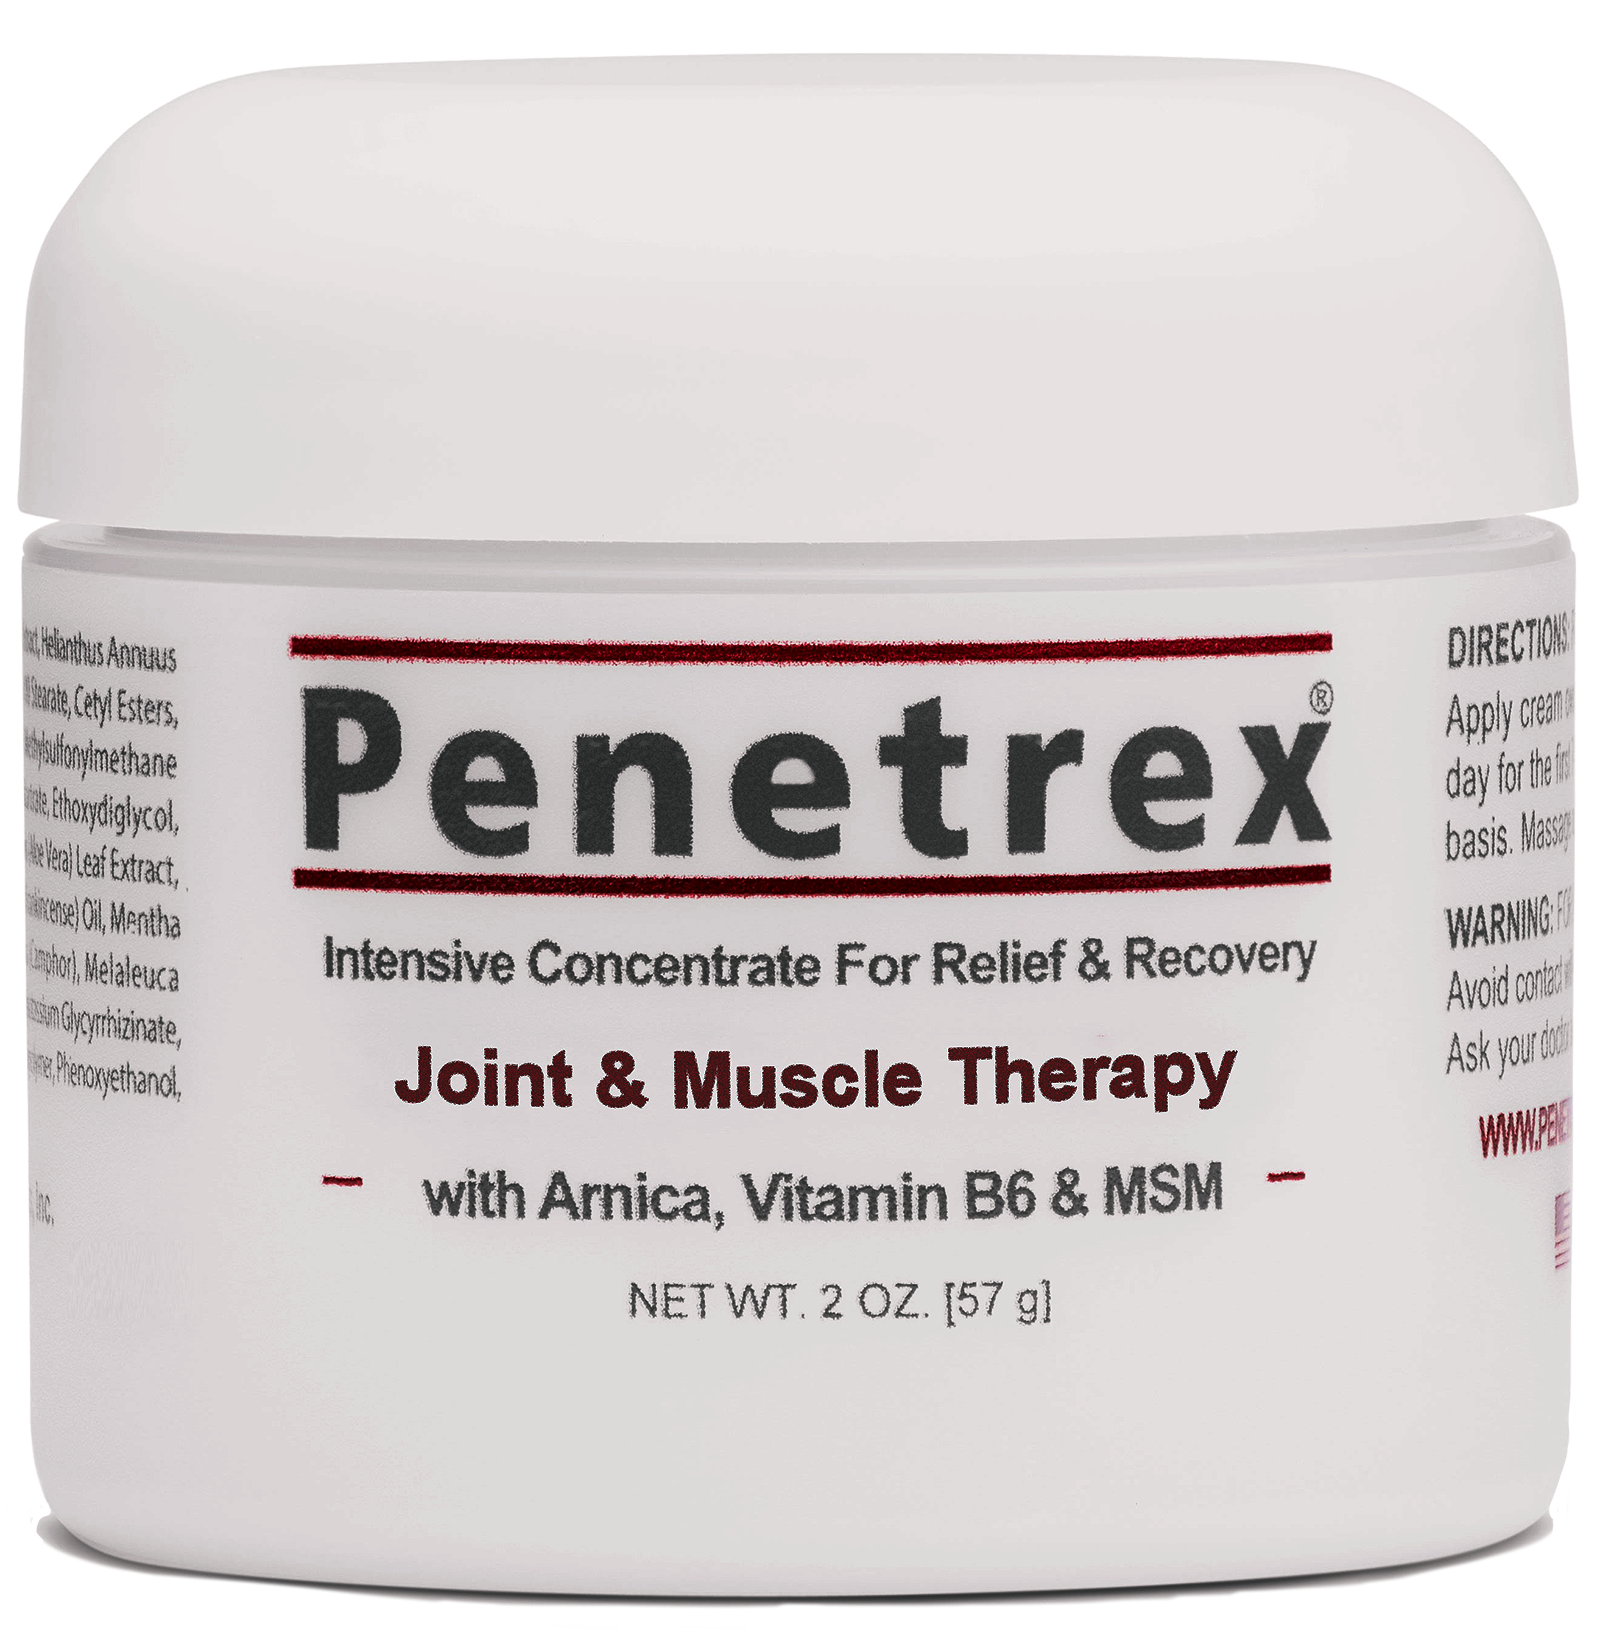 Penetrex Joint & Muscle Therapy jar